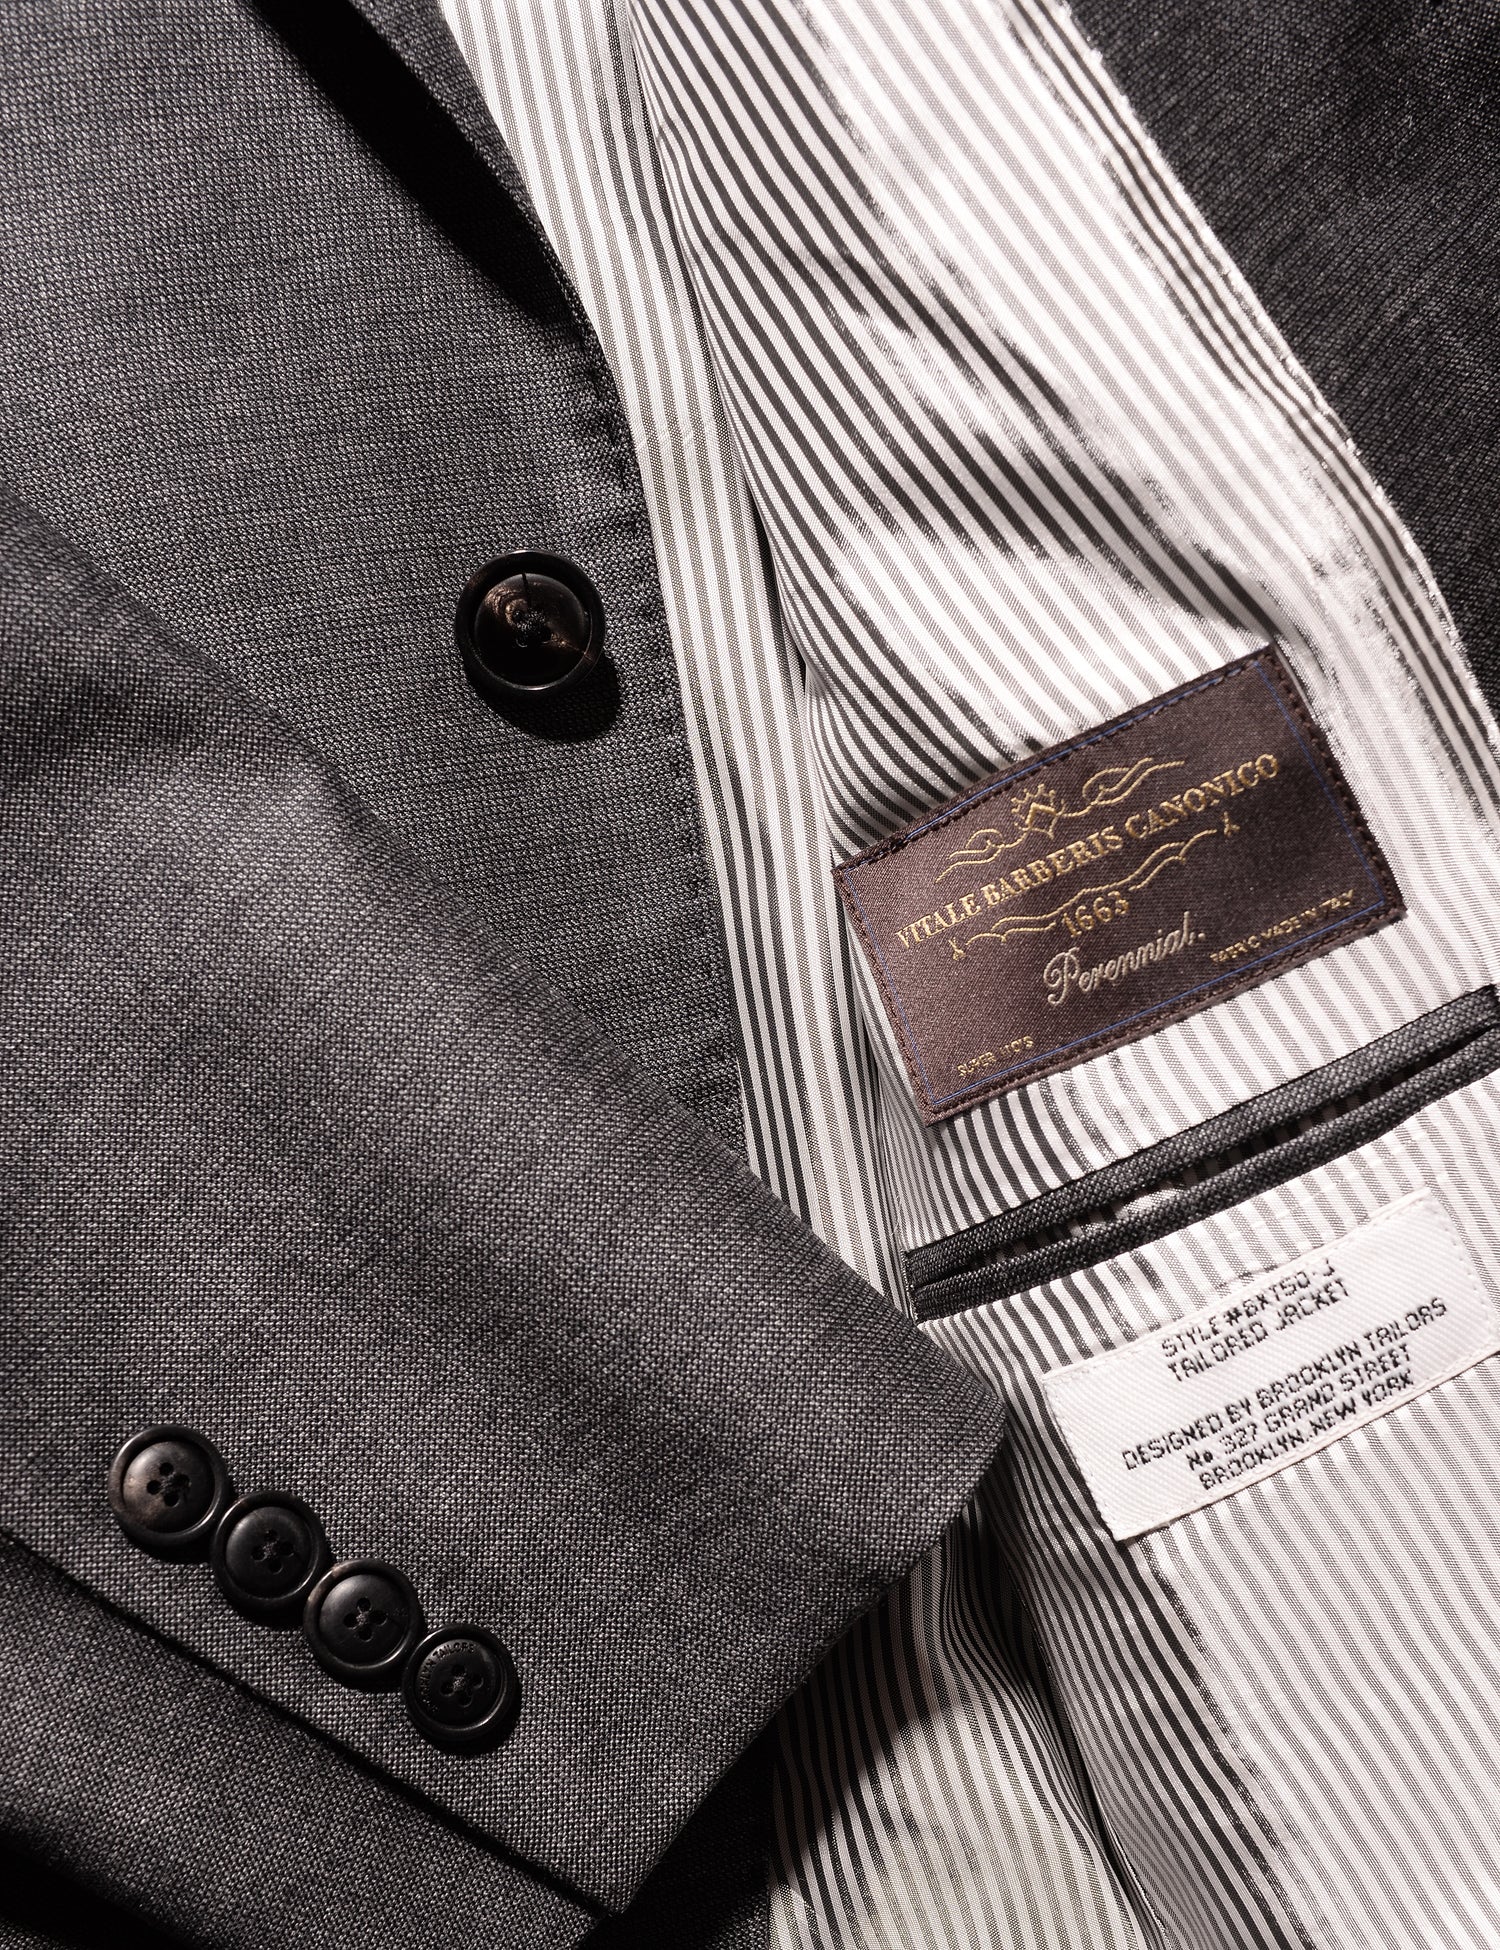 Detail shot of Brooklyn Tailors BKT50 Tailored Jacket in Wool Tickweave - Deep Gray showing cuff, lining, and interior labels